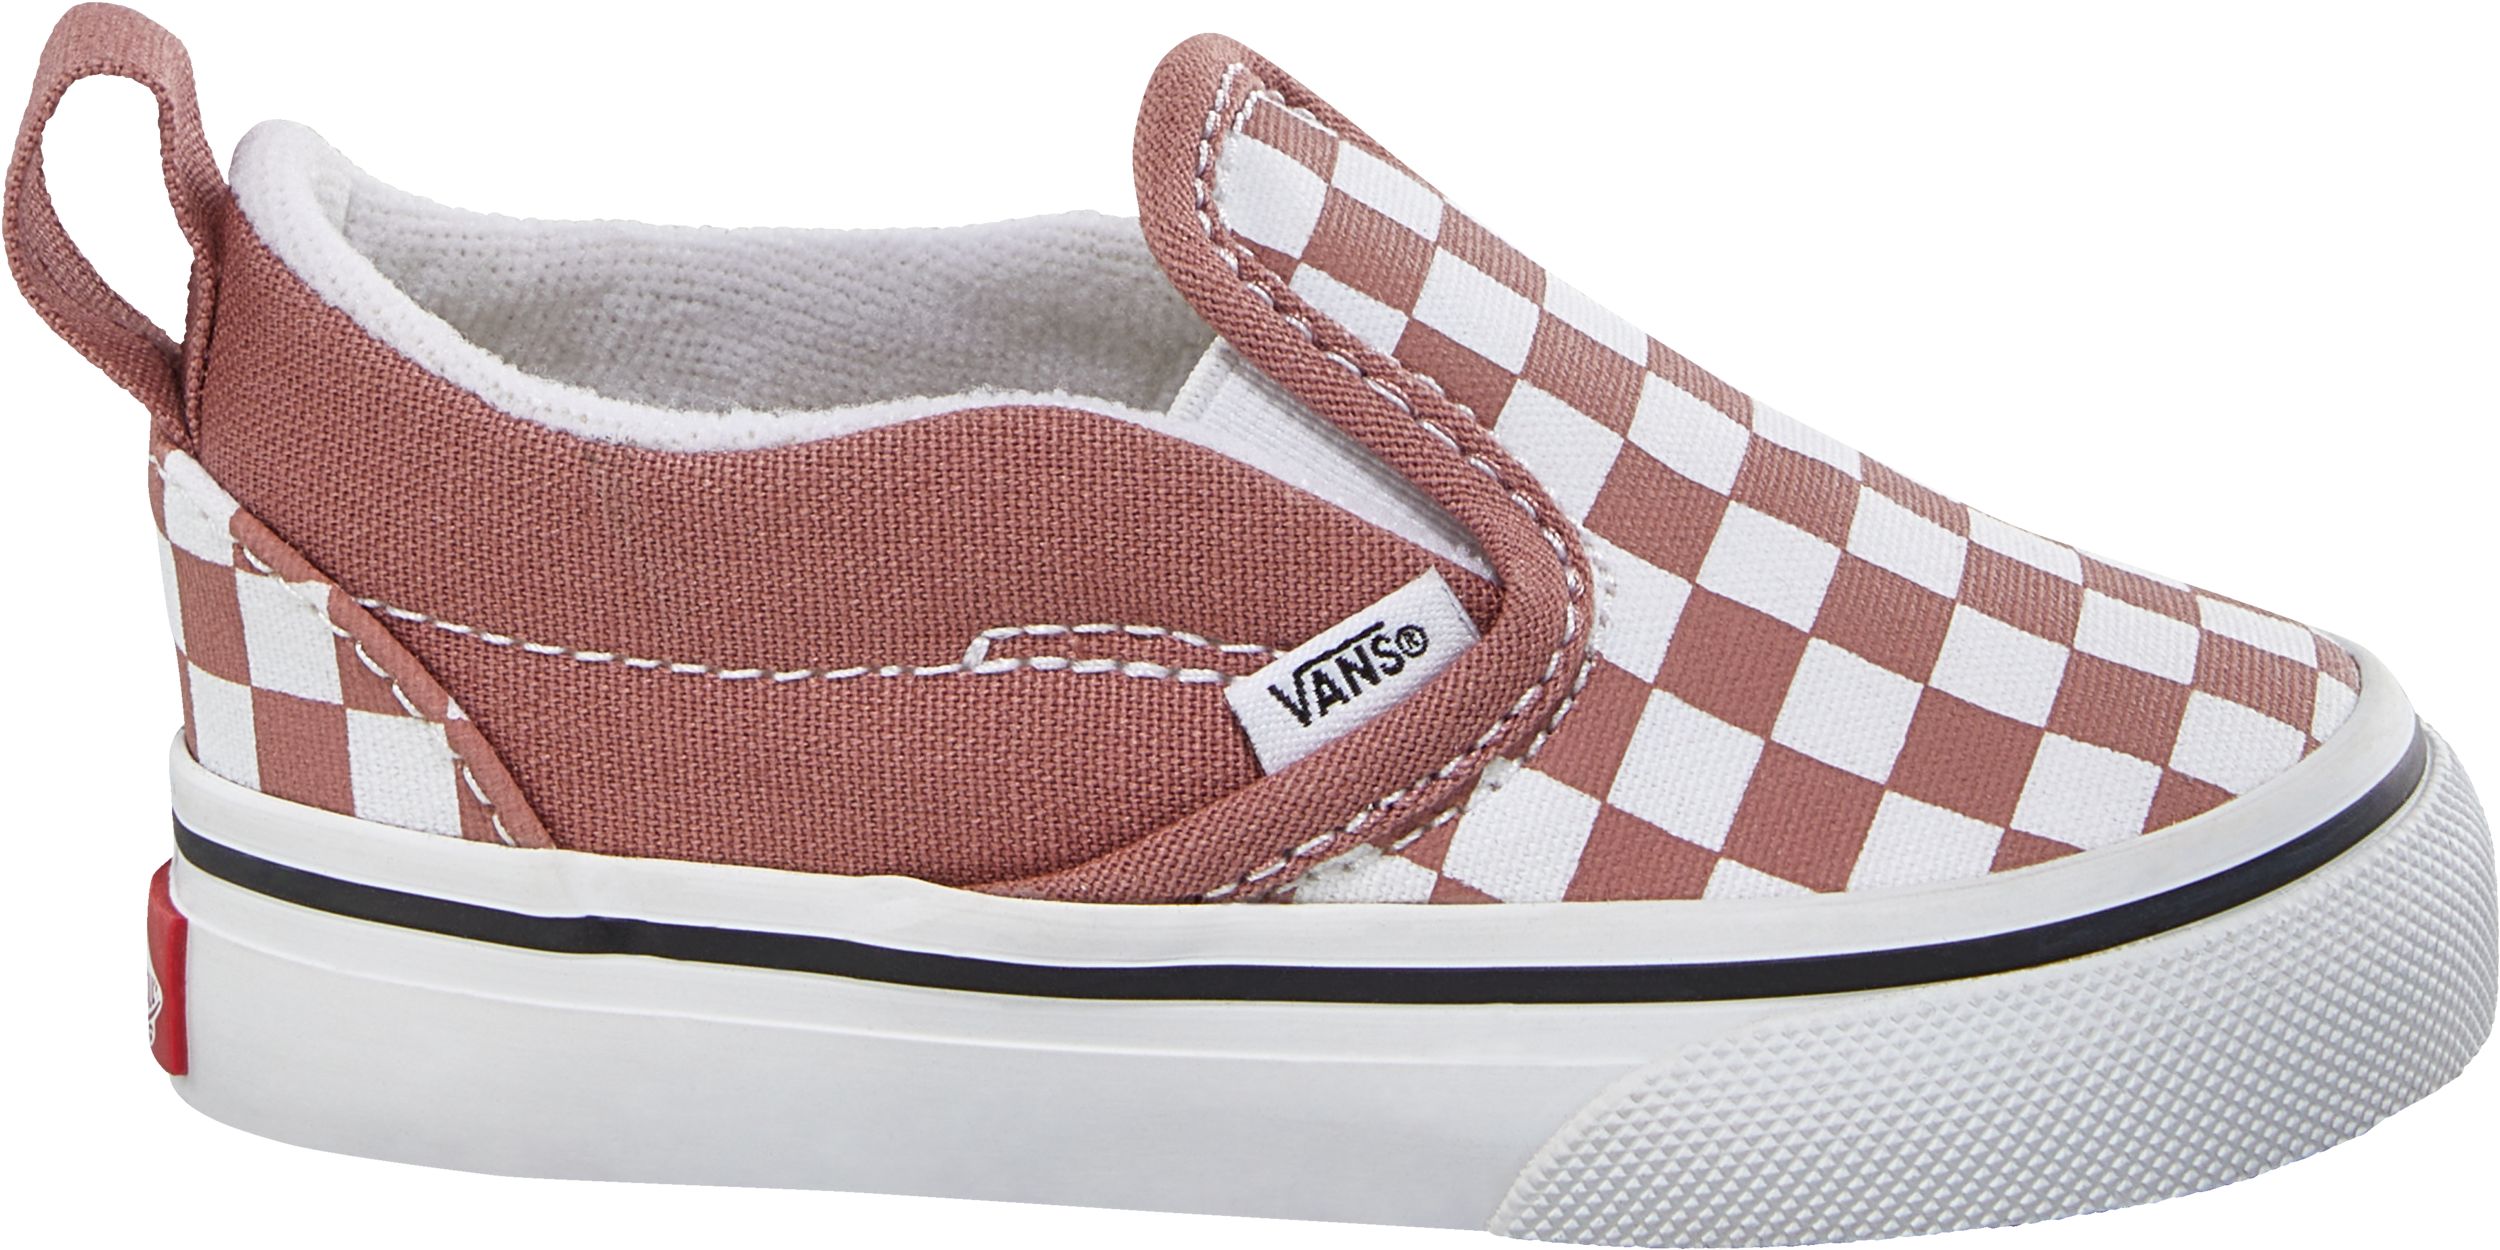 Image of Vans Kids' Toddler Slip-On Checkerboard Casual Shoes Sneakers